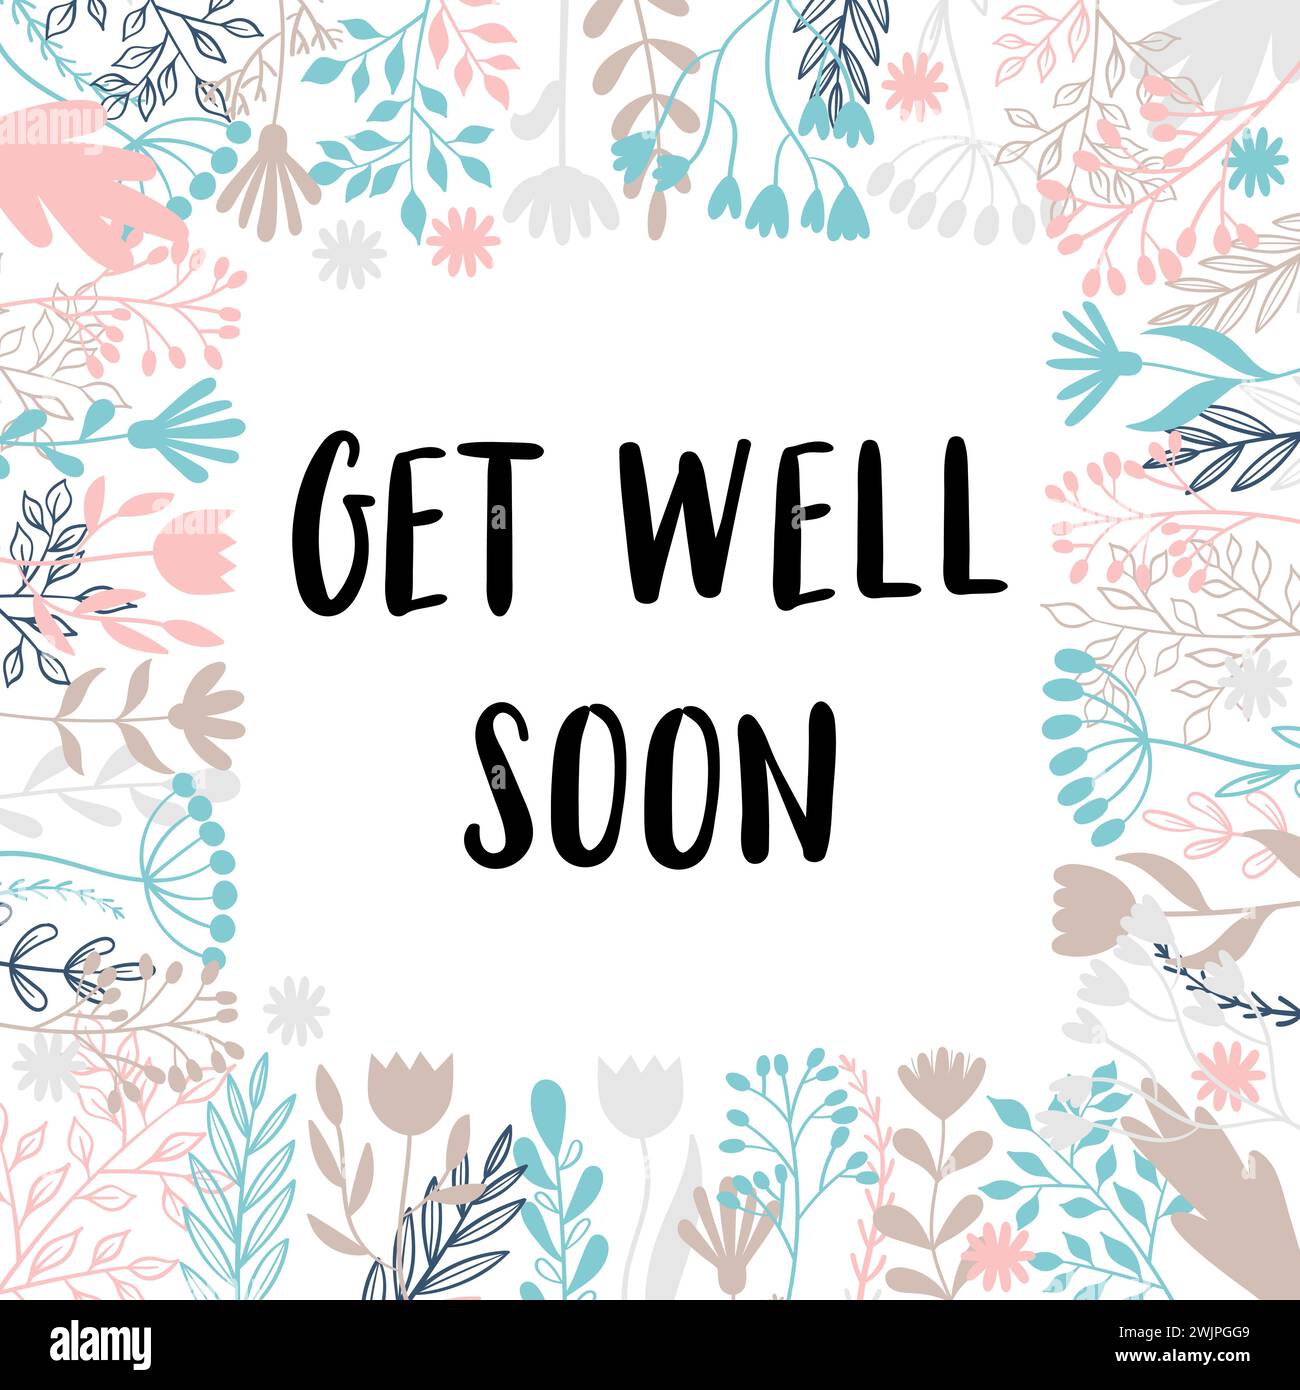 Get well soon. Inspirational and motivating phrase. Quote, slogan. Lettering design for poster, banner, postcard. Vector illustration Stock Vector